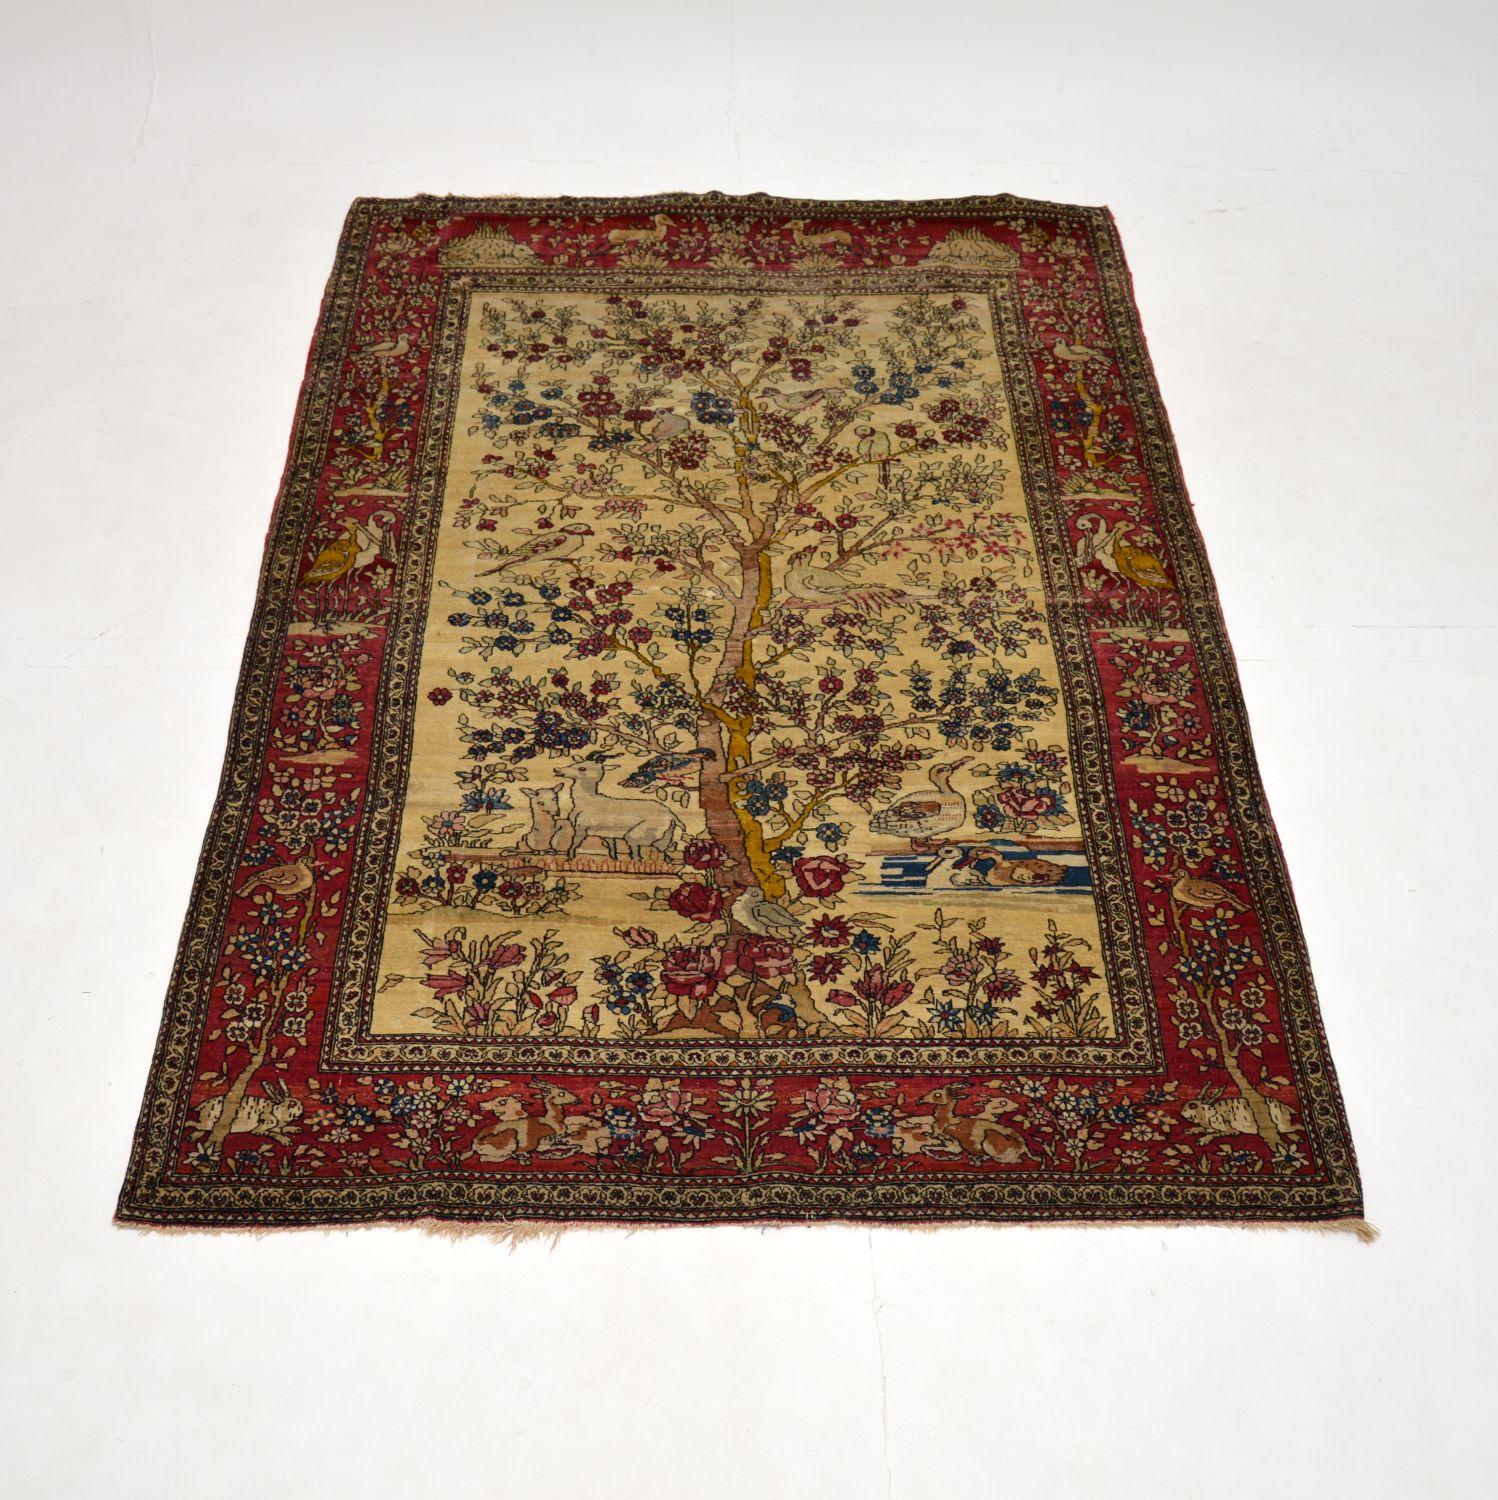 A large beautiful and very high quality antique Turkish rug, dating from around the 1890-1910 period.

It depicts a gorgeous scene of a large tree and various animals, with wonderful patterned borders.

It is in good condition for its age, with